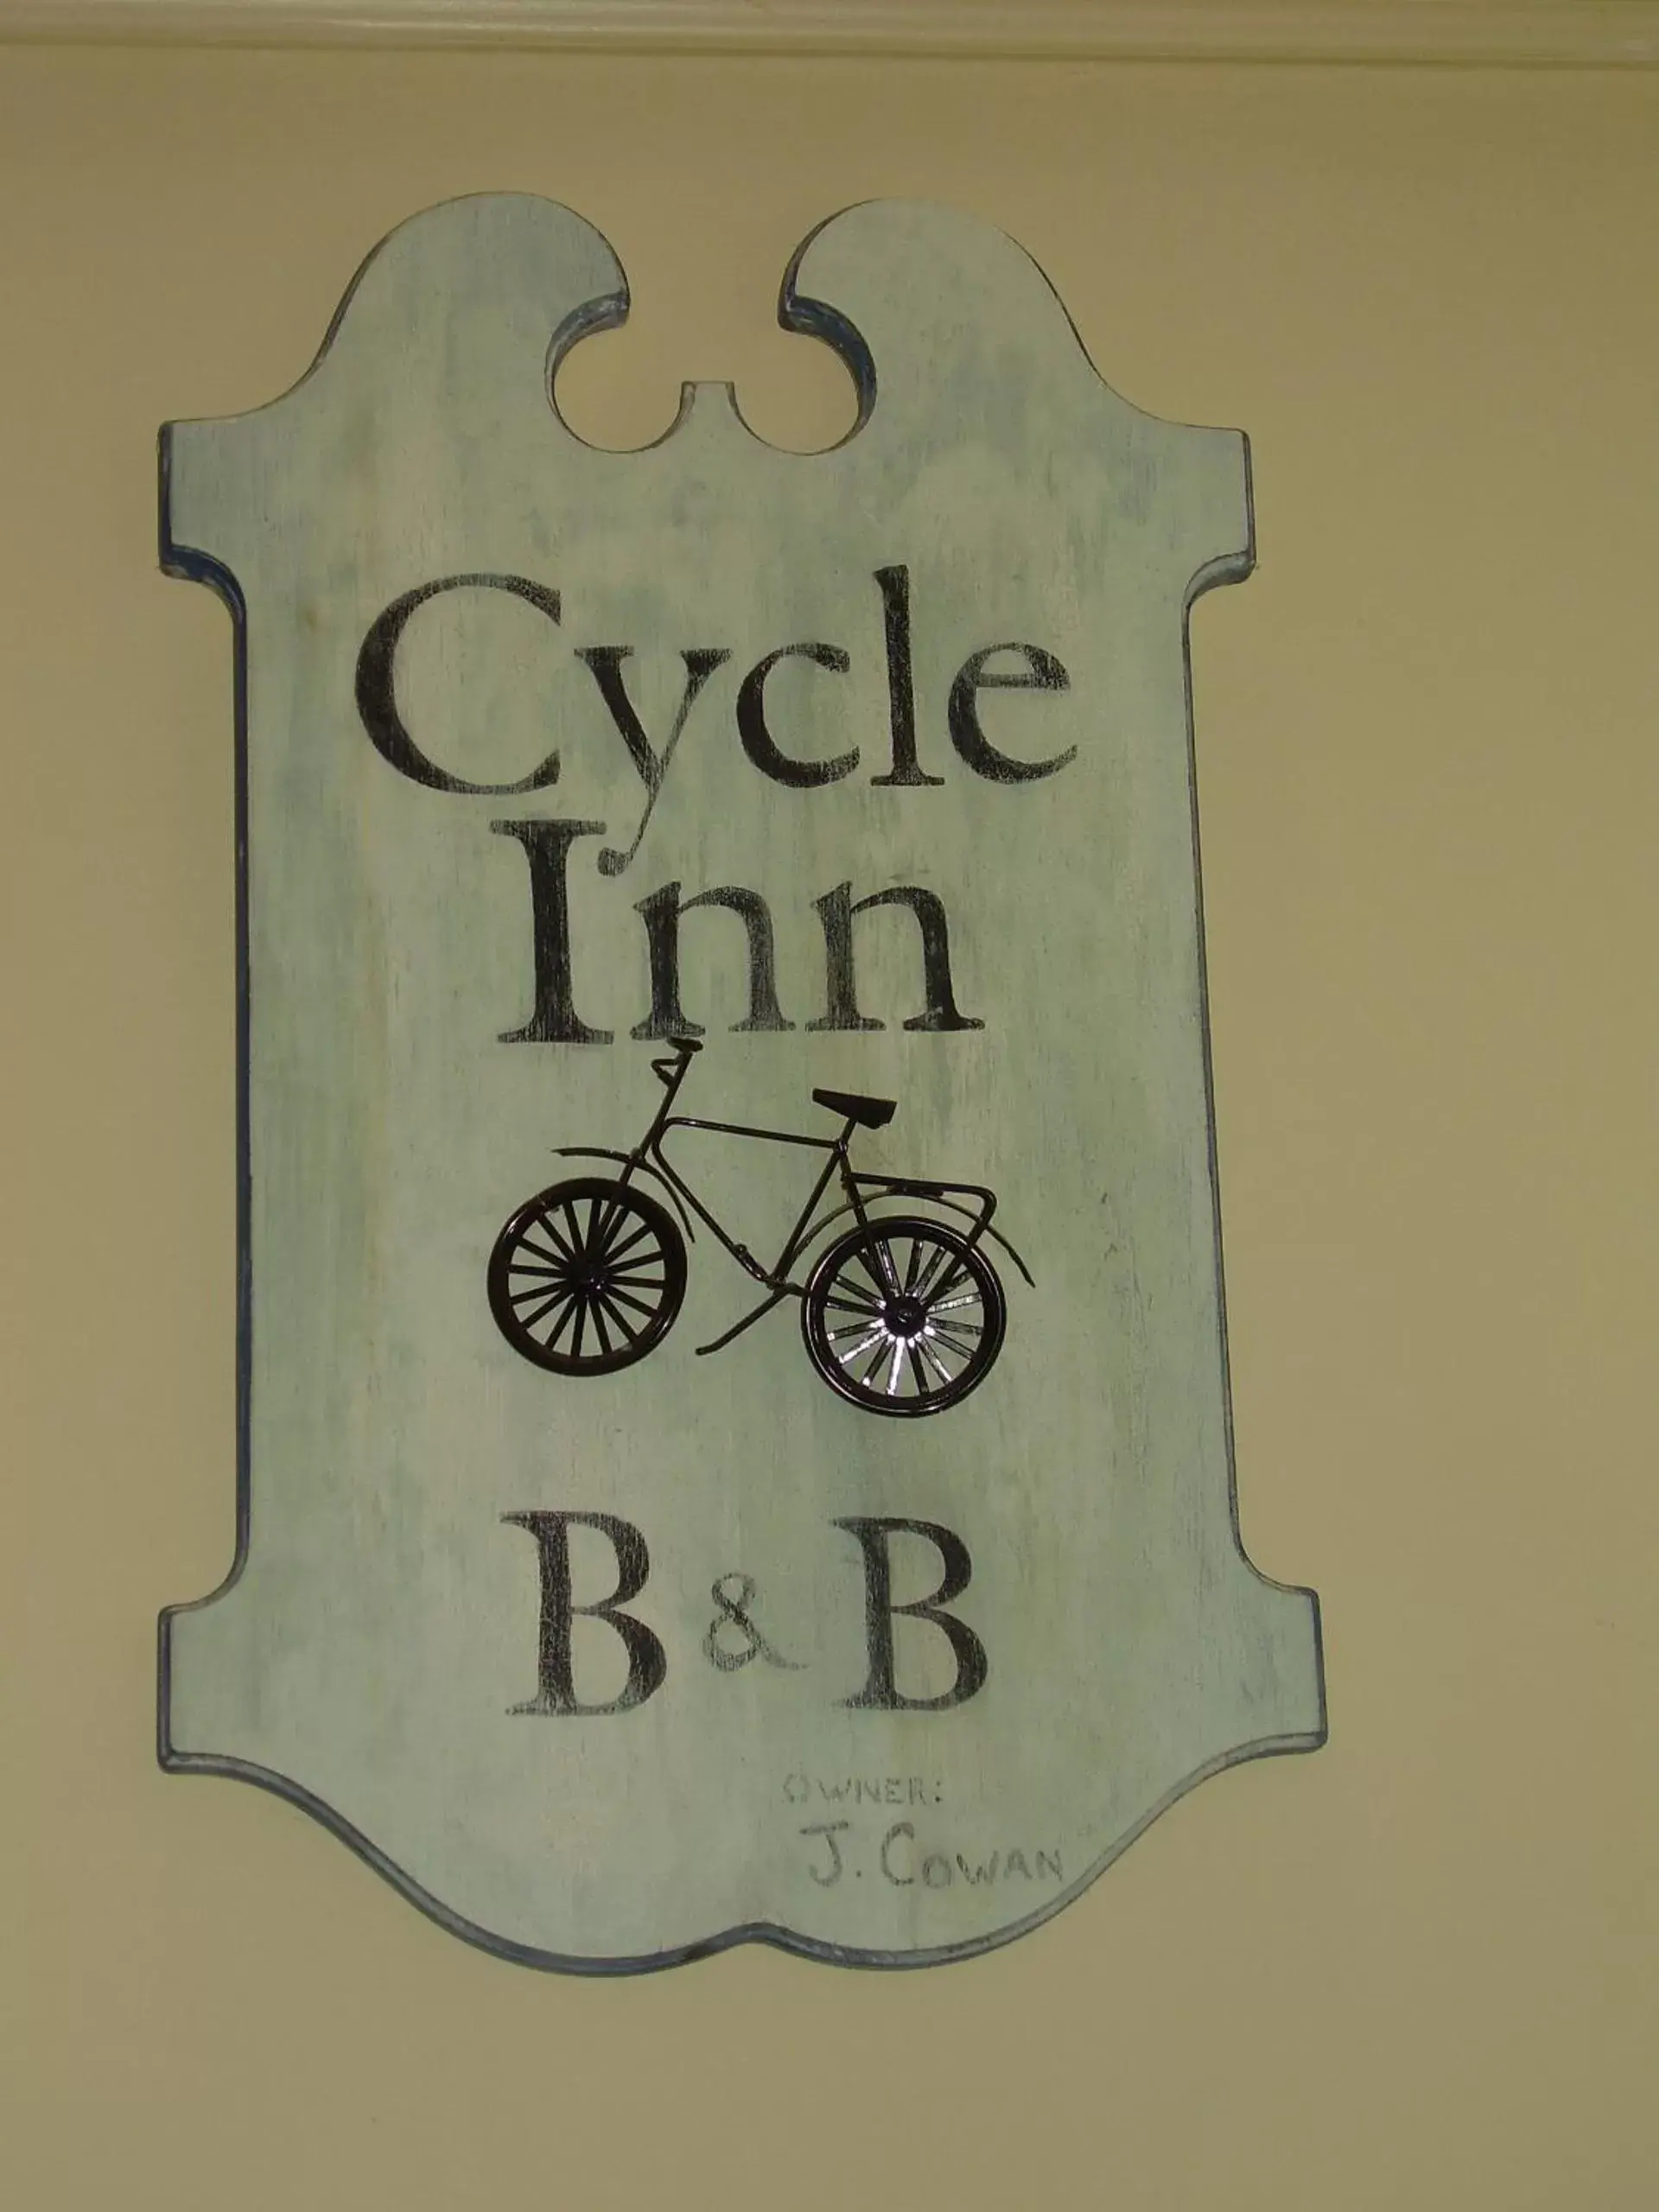 Property logo or sign in Cycle Inn Bed and Breakfast